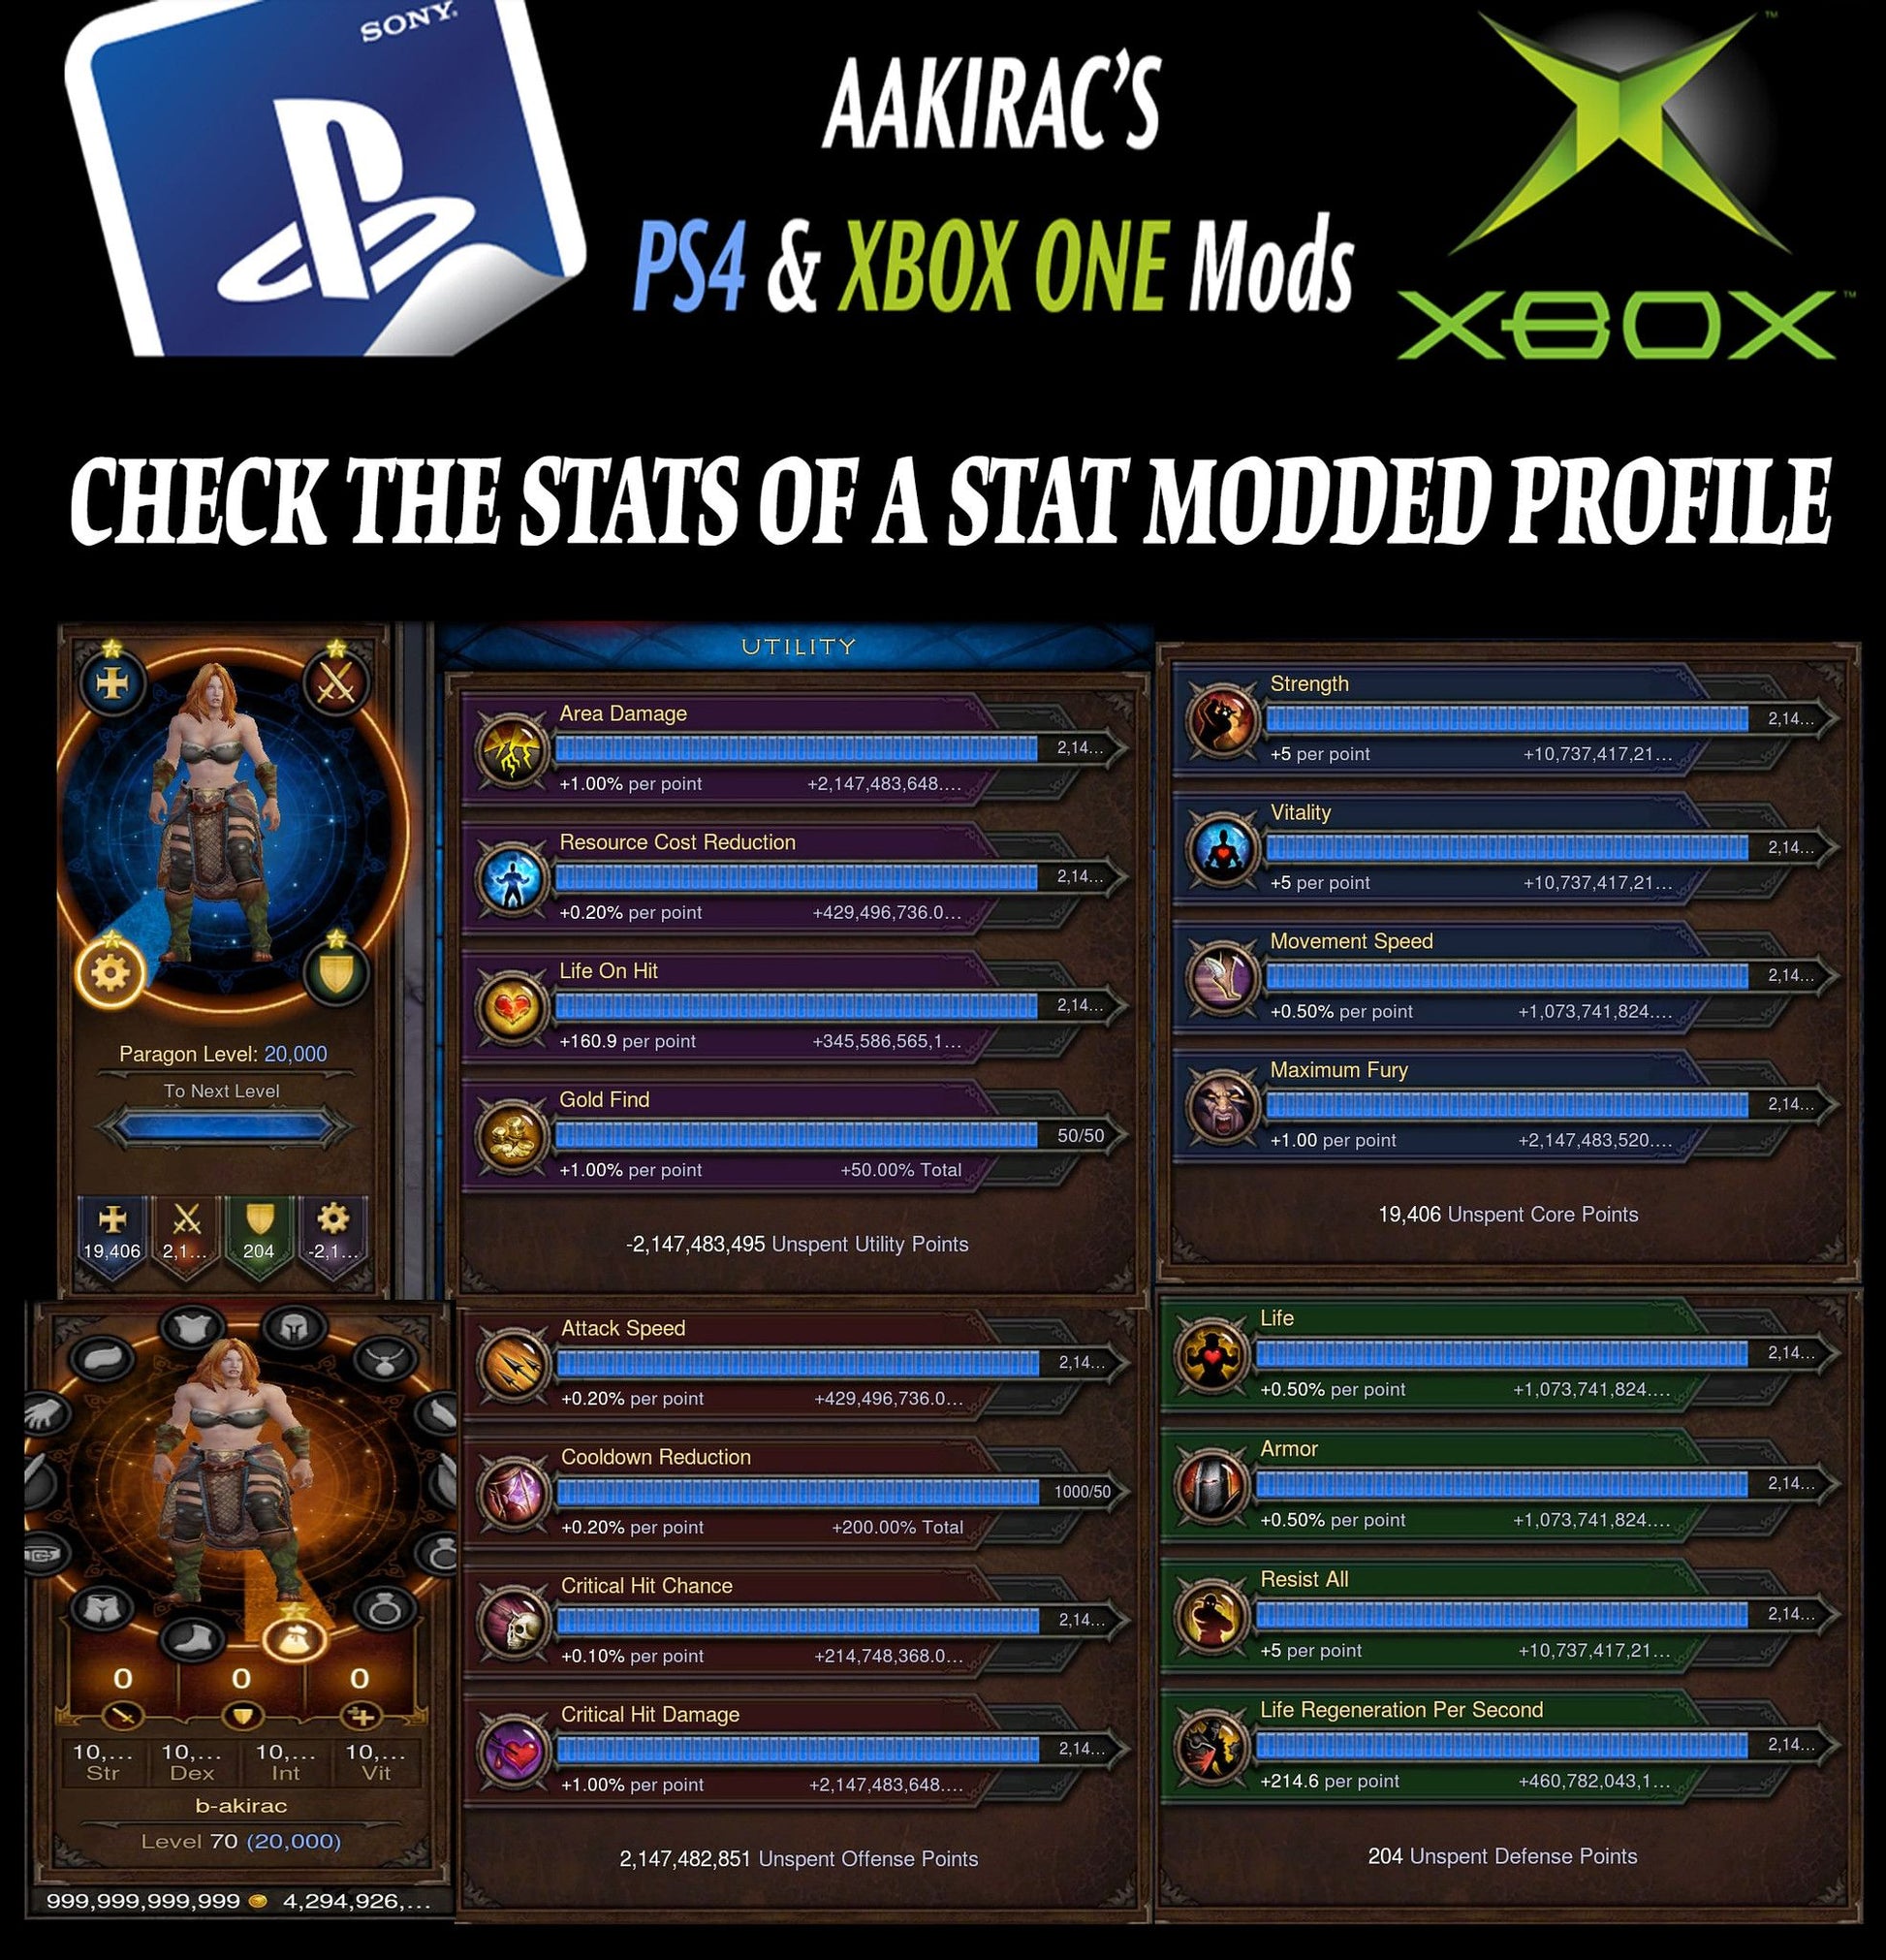 12x EXTREME Stat Modded Characters w/ Materials and Pets Bundle Diablo 3 Mods ROS Seasonal and Non Seasonal Save Mod - Modded Items and Gear - Hacks - Cheats - Trainers for Playstation 4 - Playstation 5 - Nintendo Switch - Xbox One